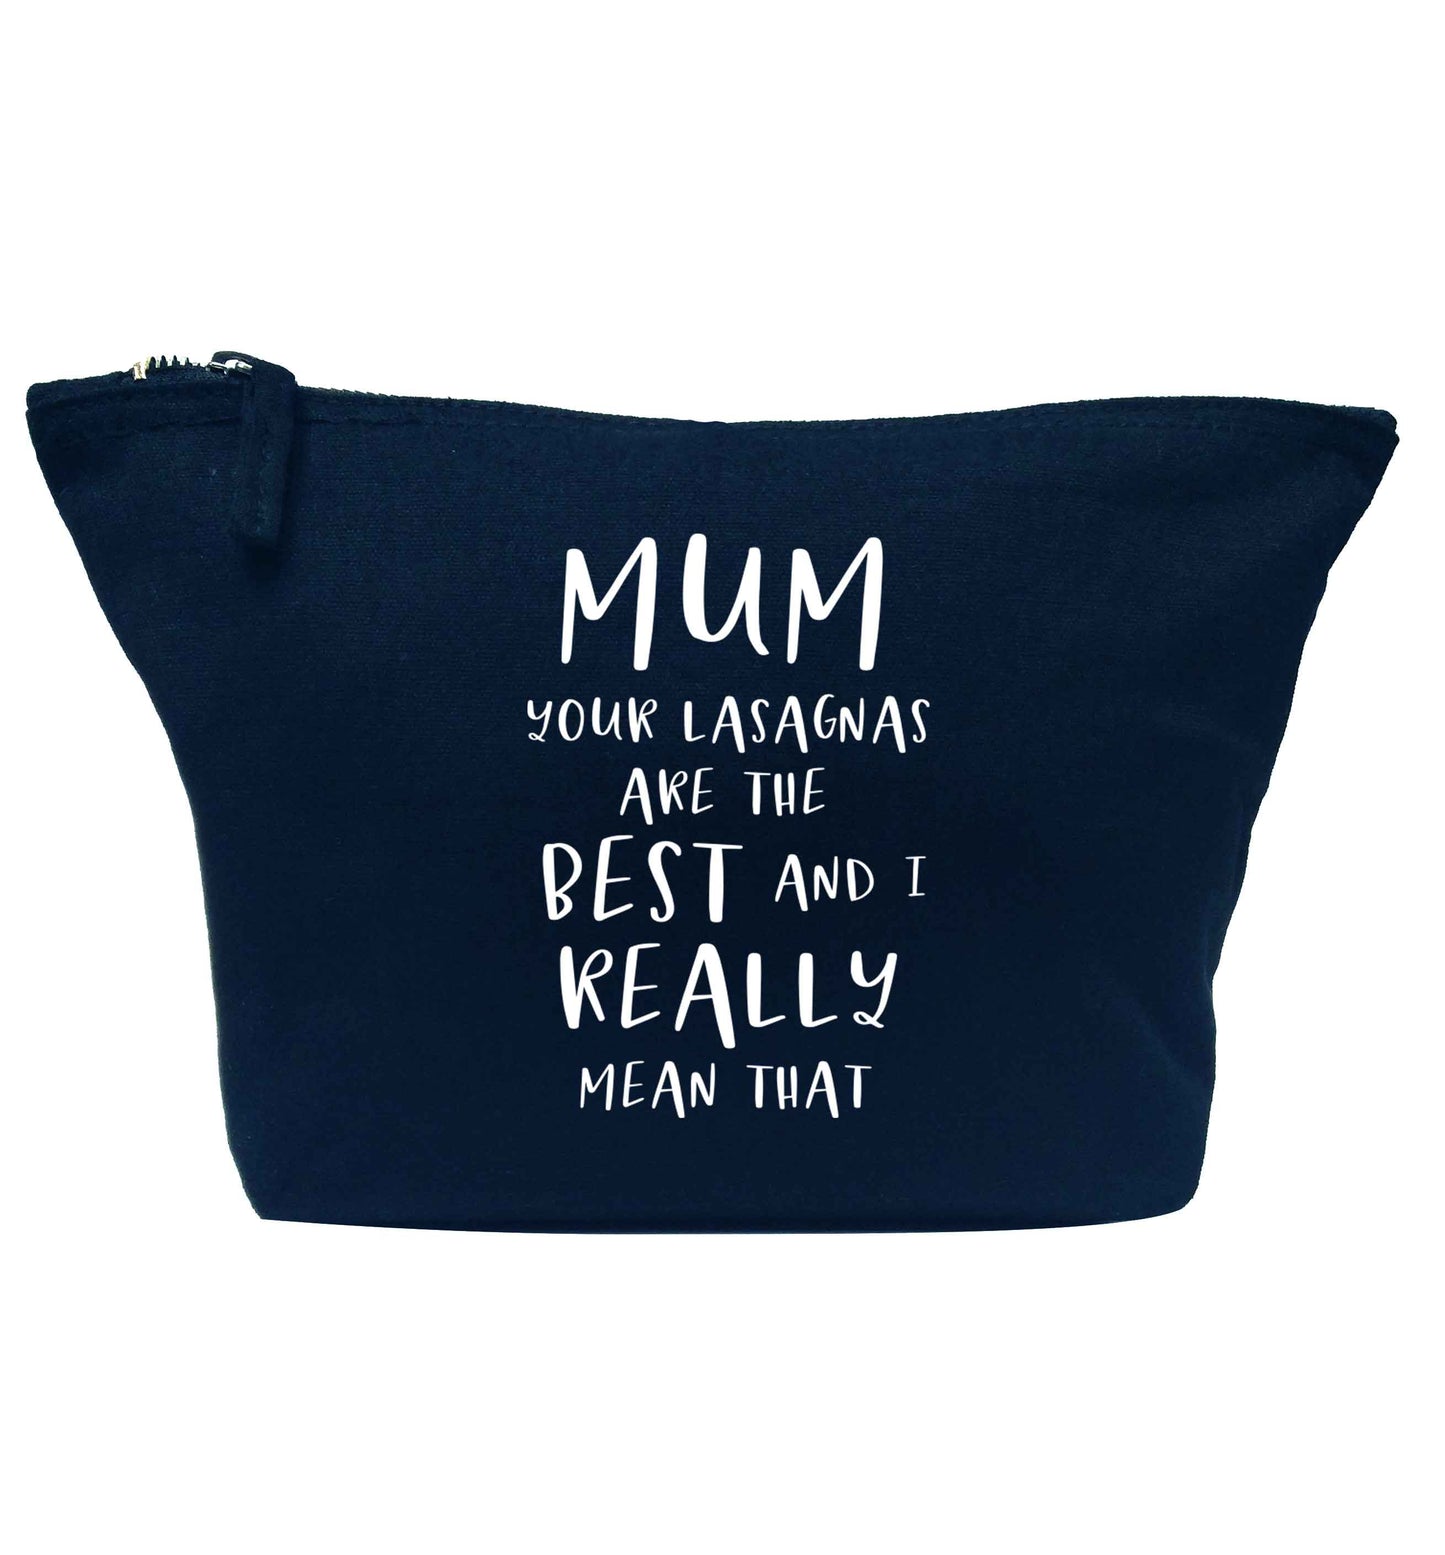 Funny gifts for your mum on mother's dayor her birthday! Mum your lasagnas are the best and I really mean that navy makeup bag